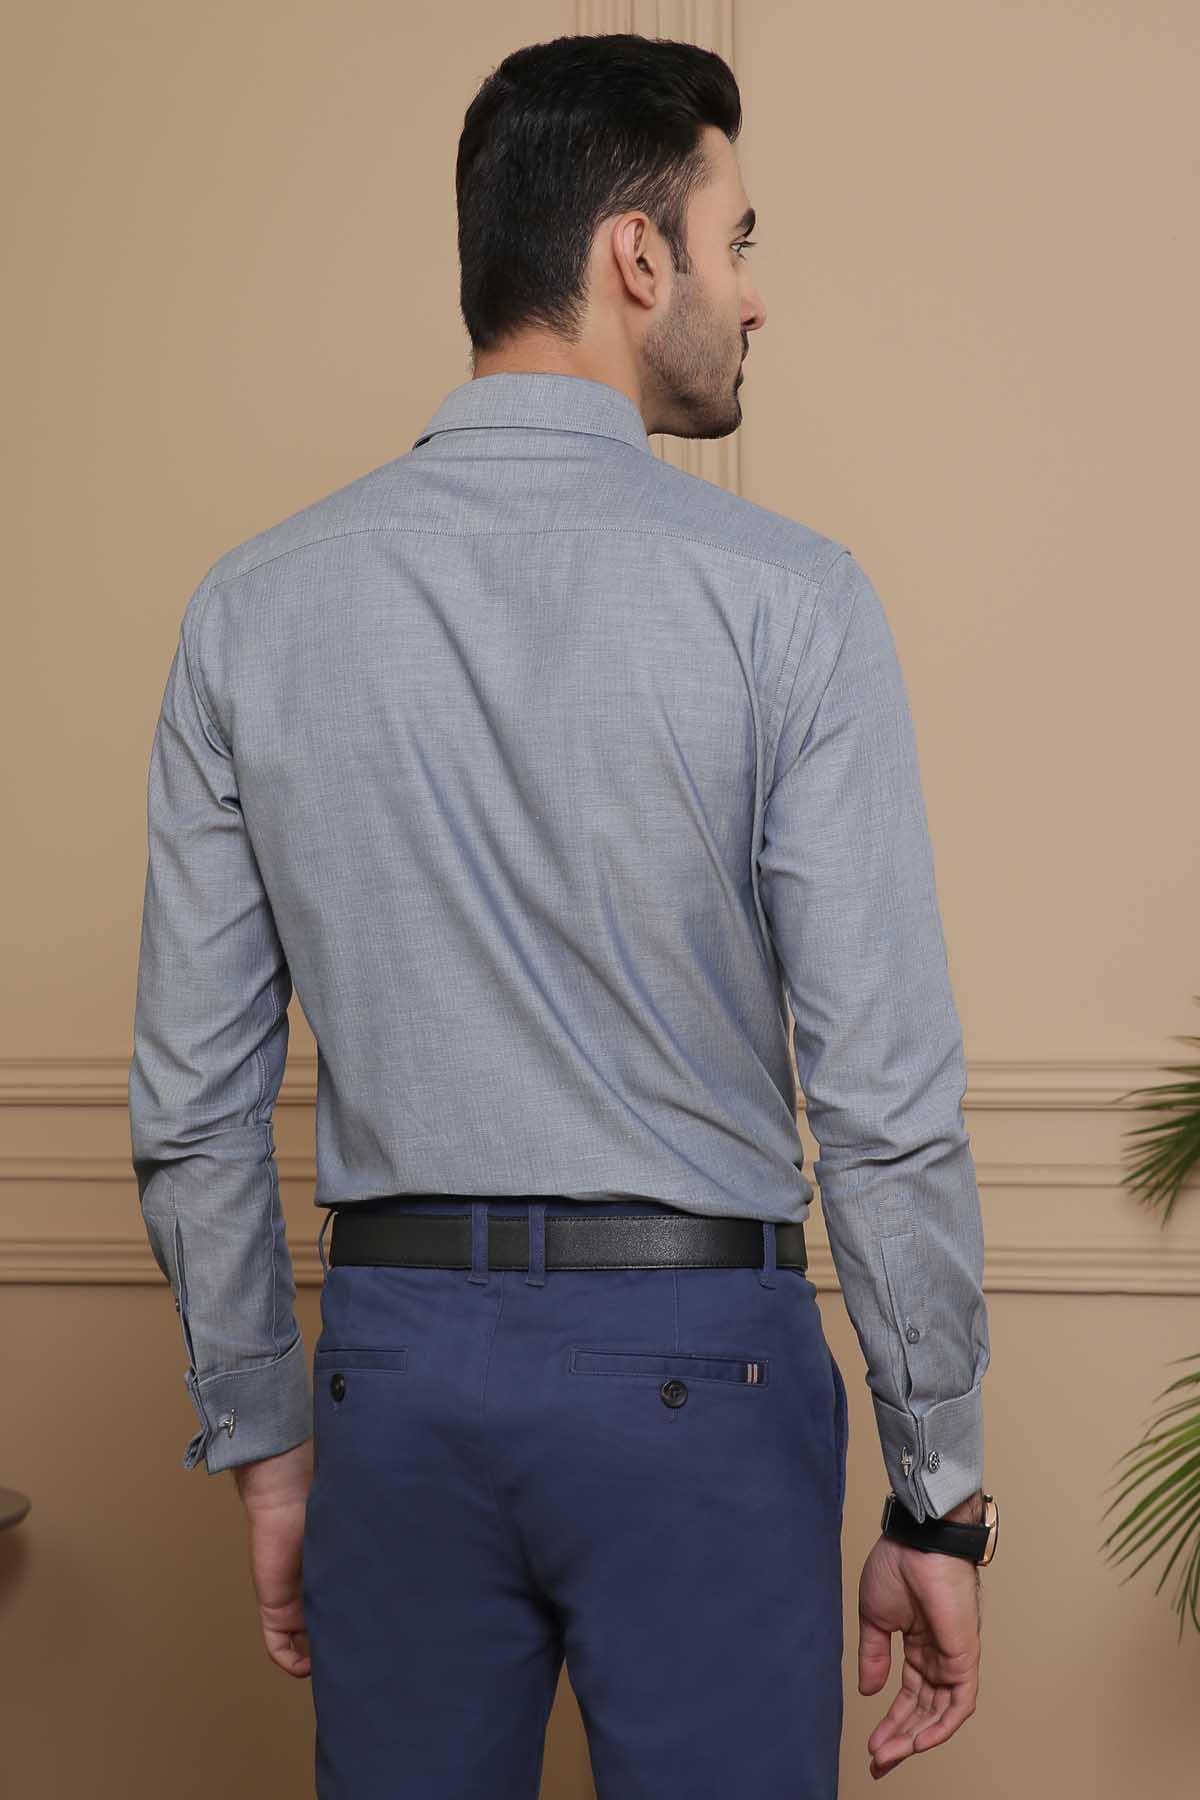 DRESS SHIRT FULL COLLAR  DOUBLE CUFF BLUE GREY at Charcoal Clothing